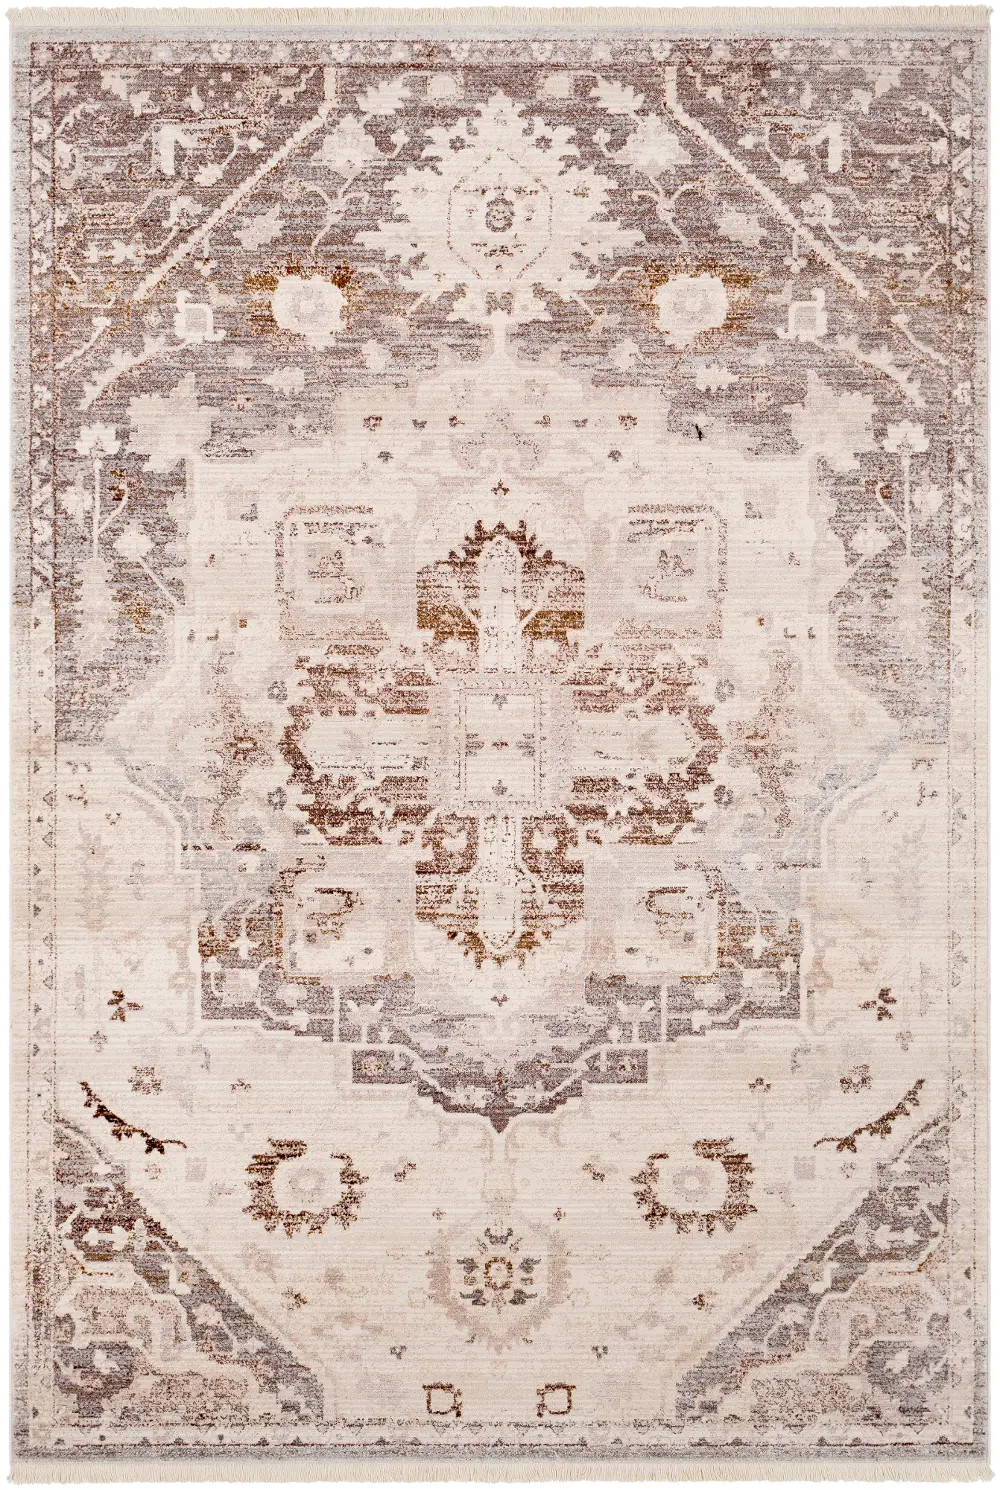 4 x 6 Small Beige, Brown and Gray Area Rug - Ephesians-1